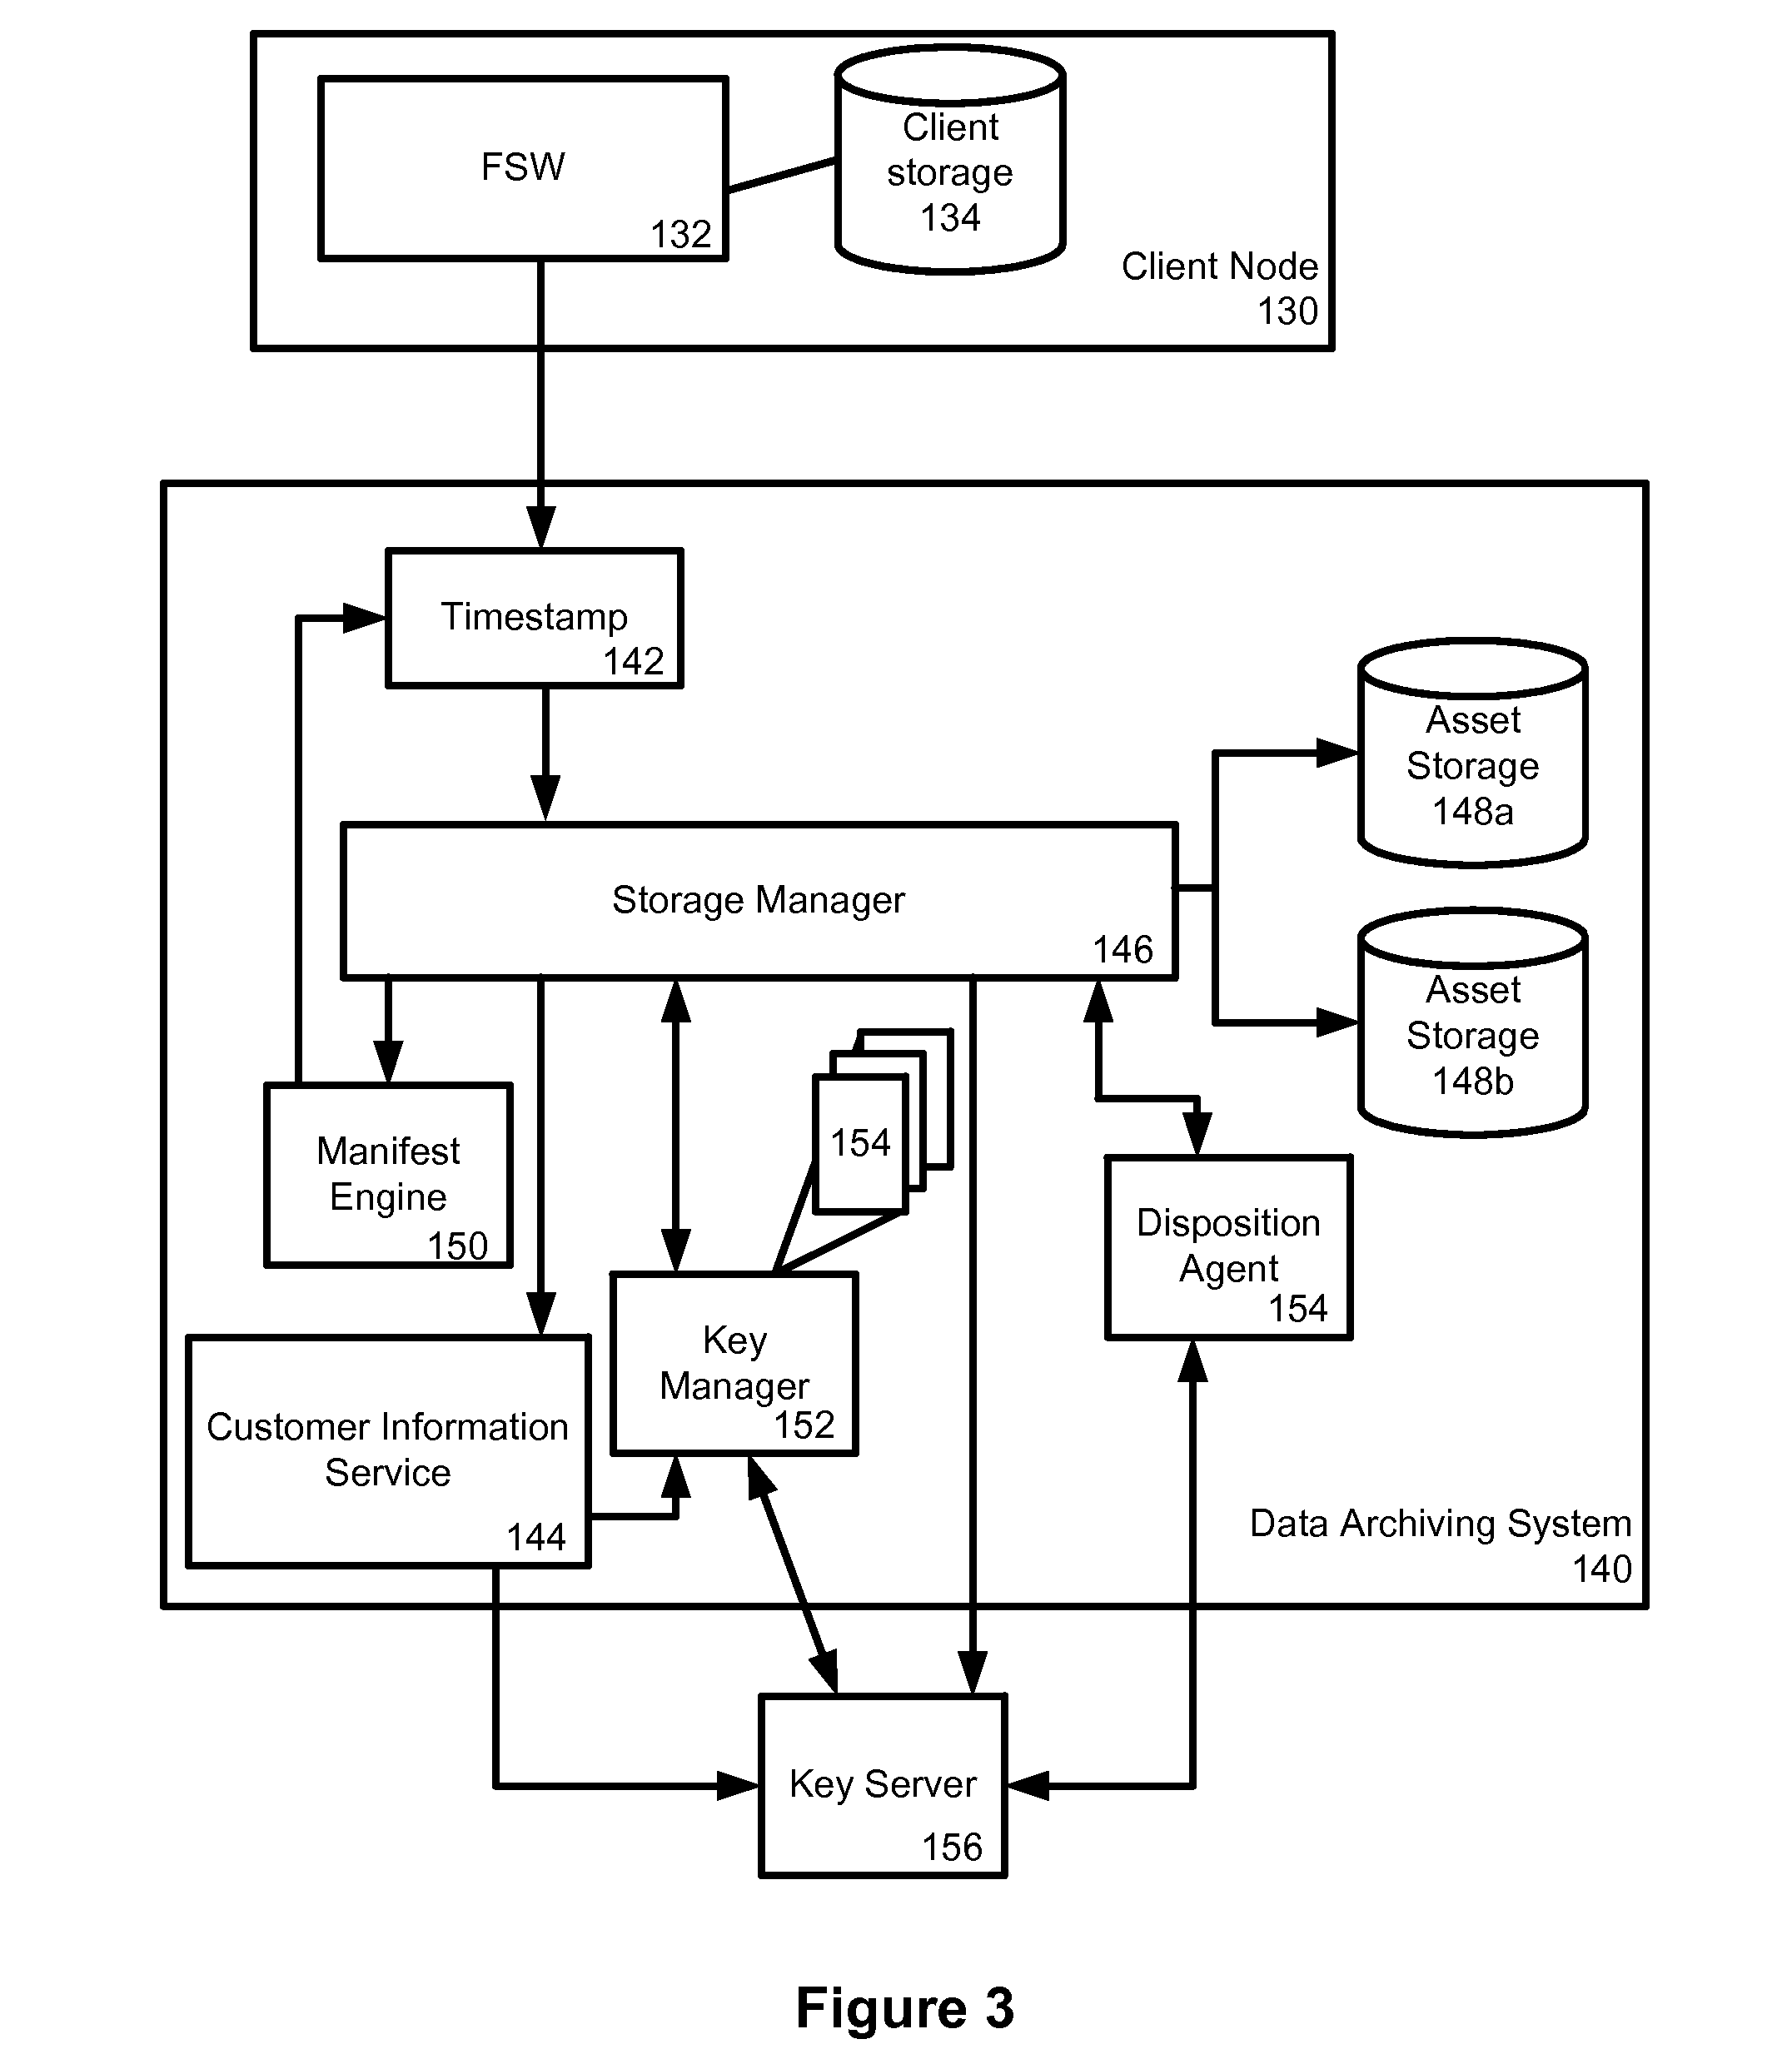 Data archiving system